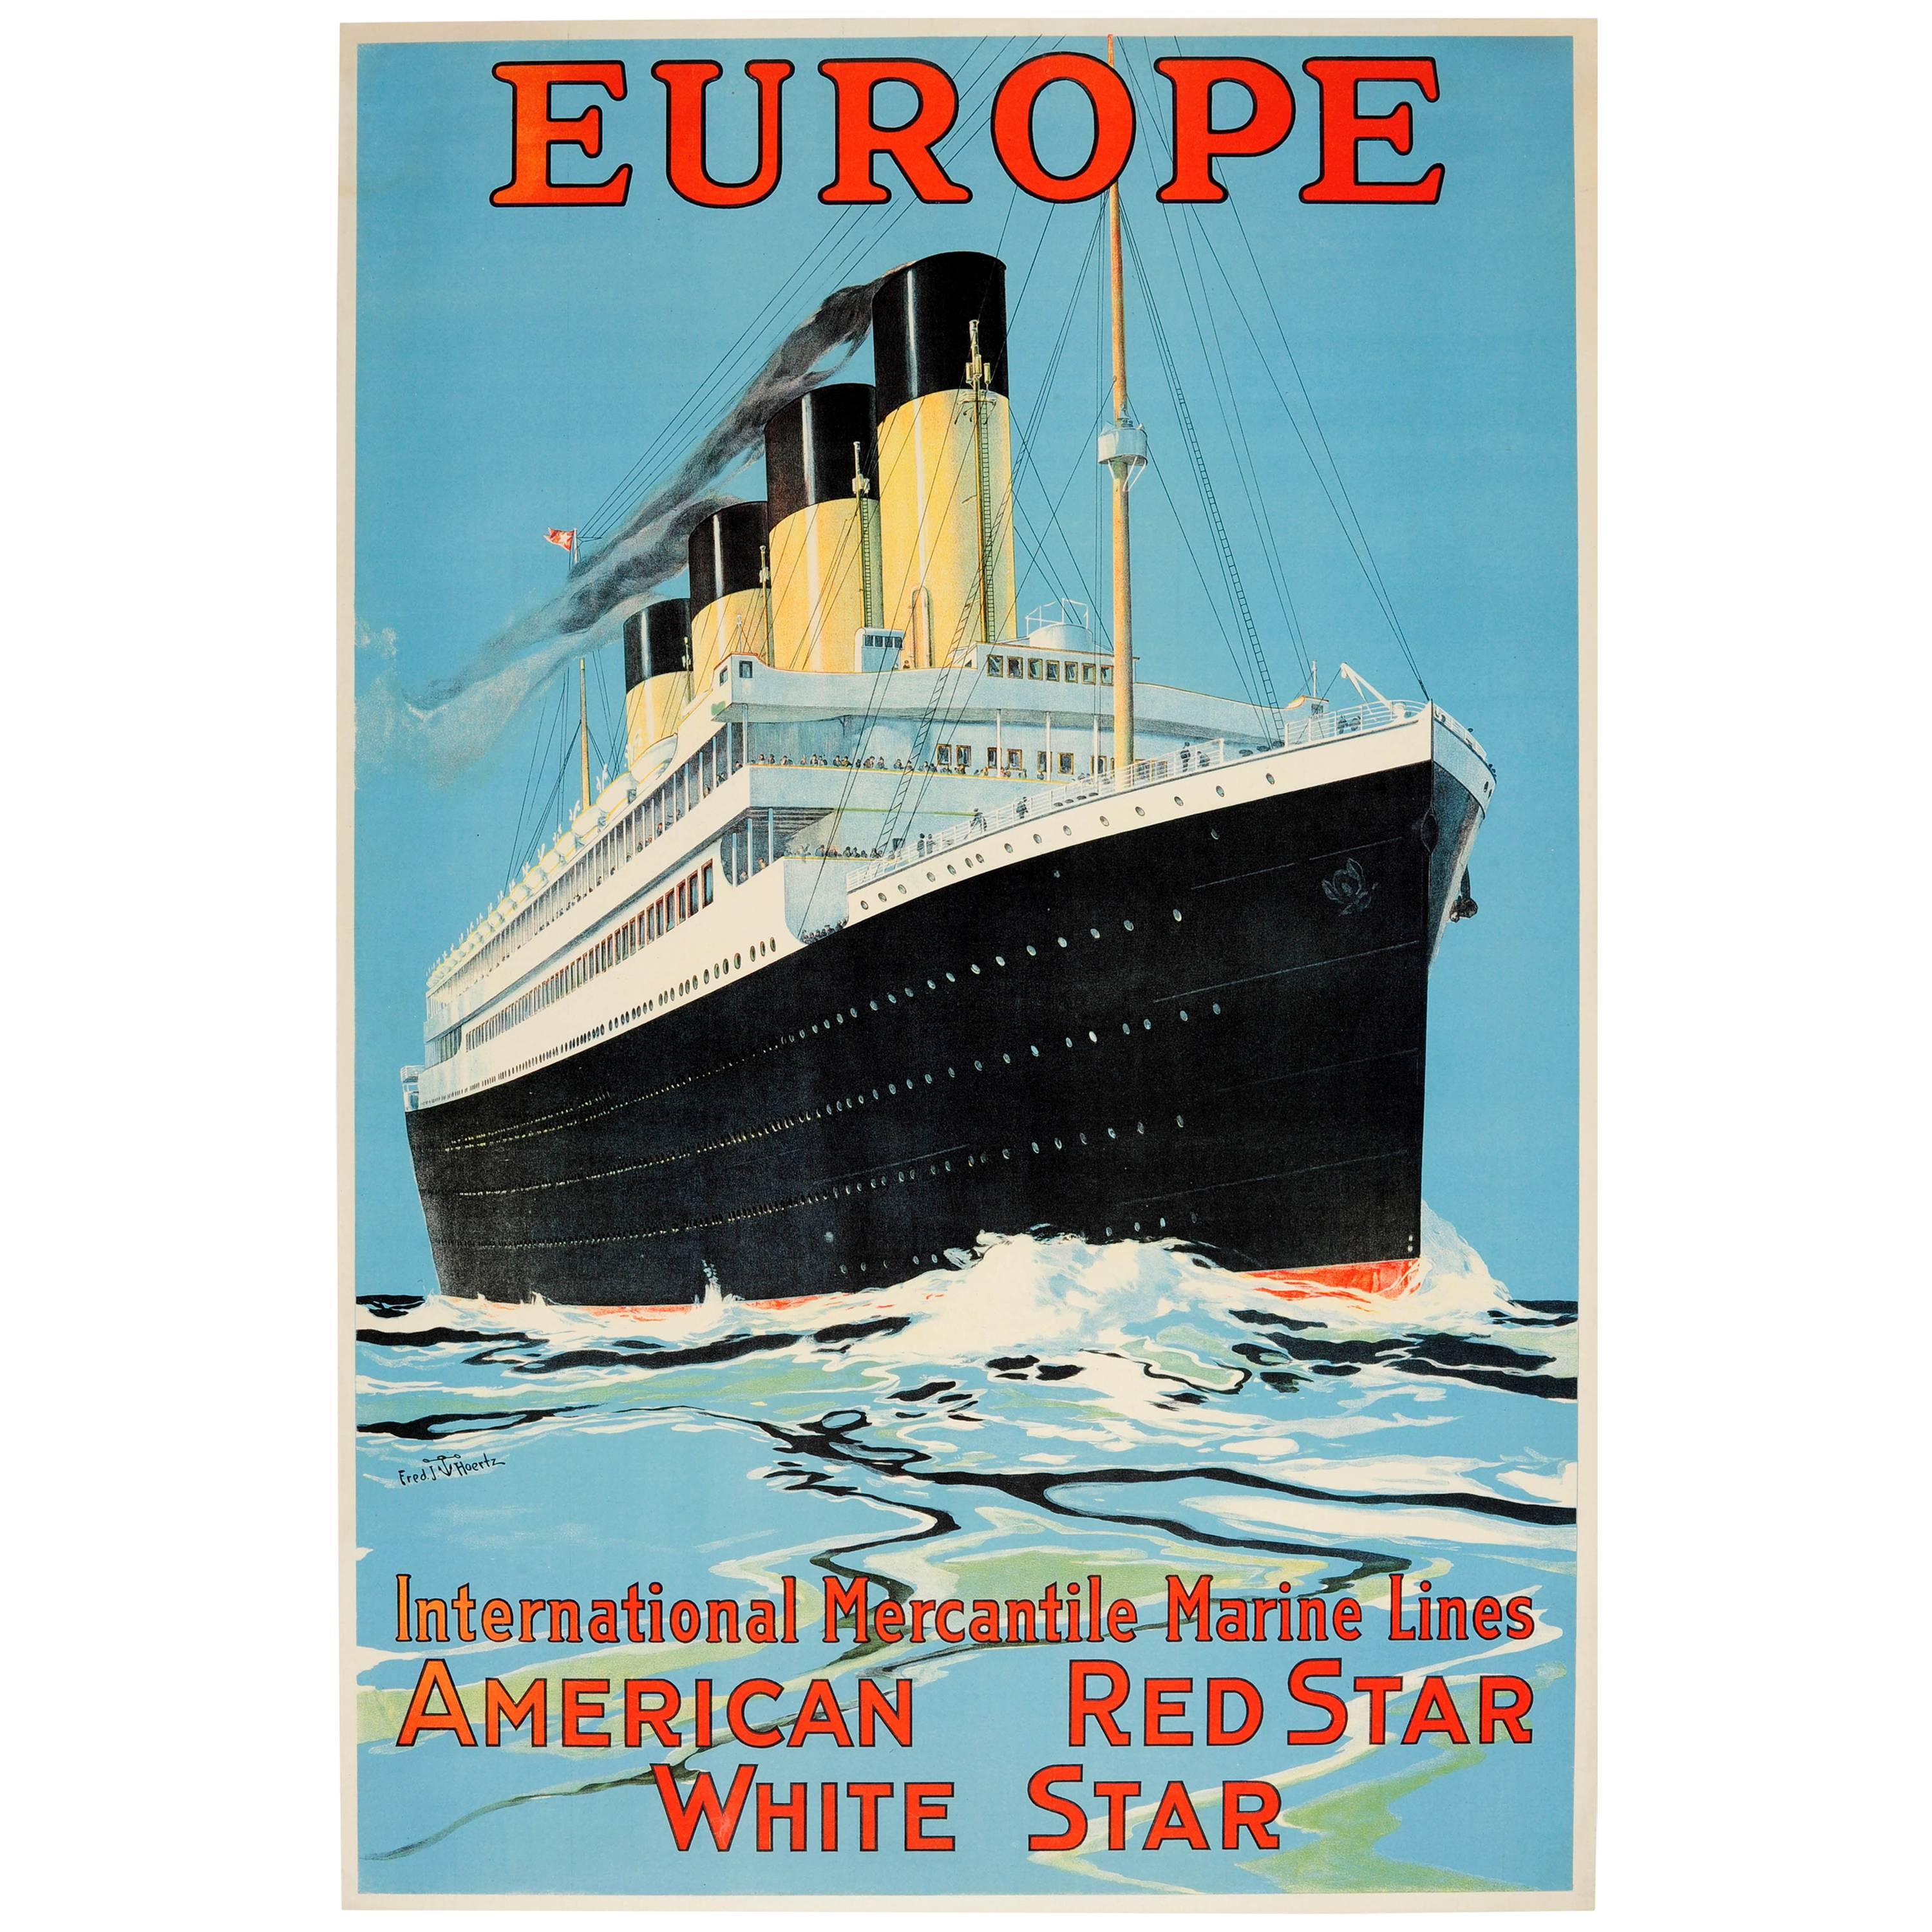 Original 1910s Cruise Ship Poster, Europe IMM Lines American Red Star White Star